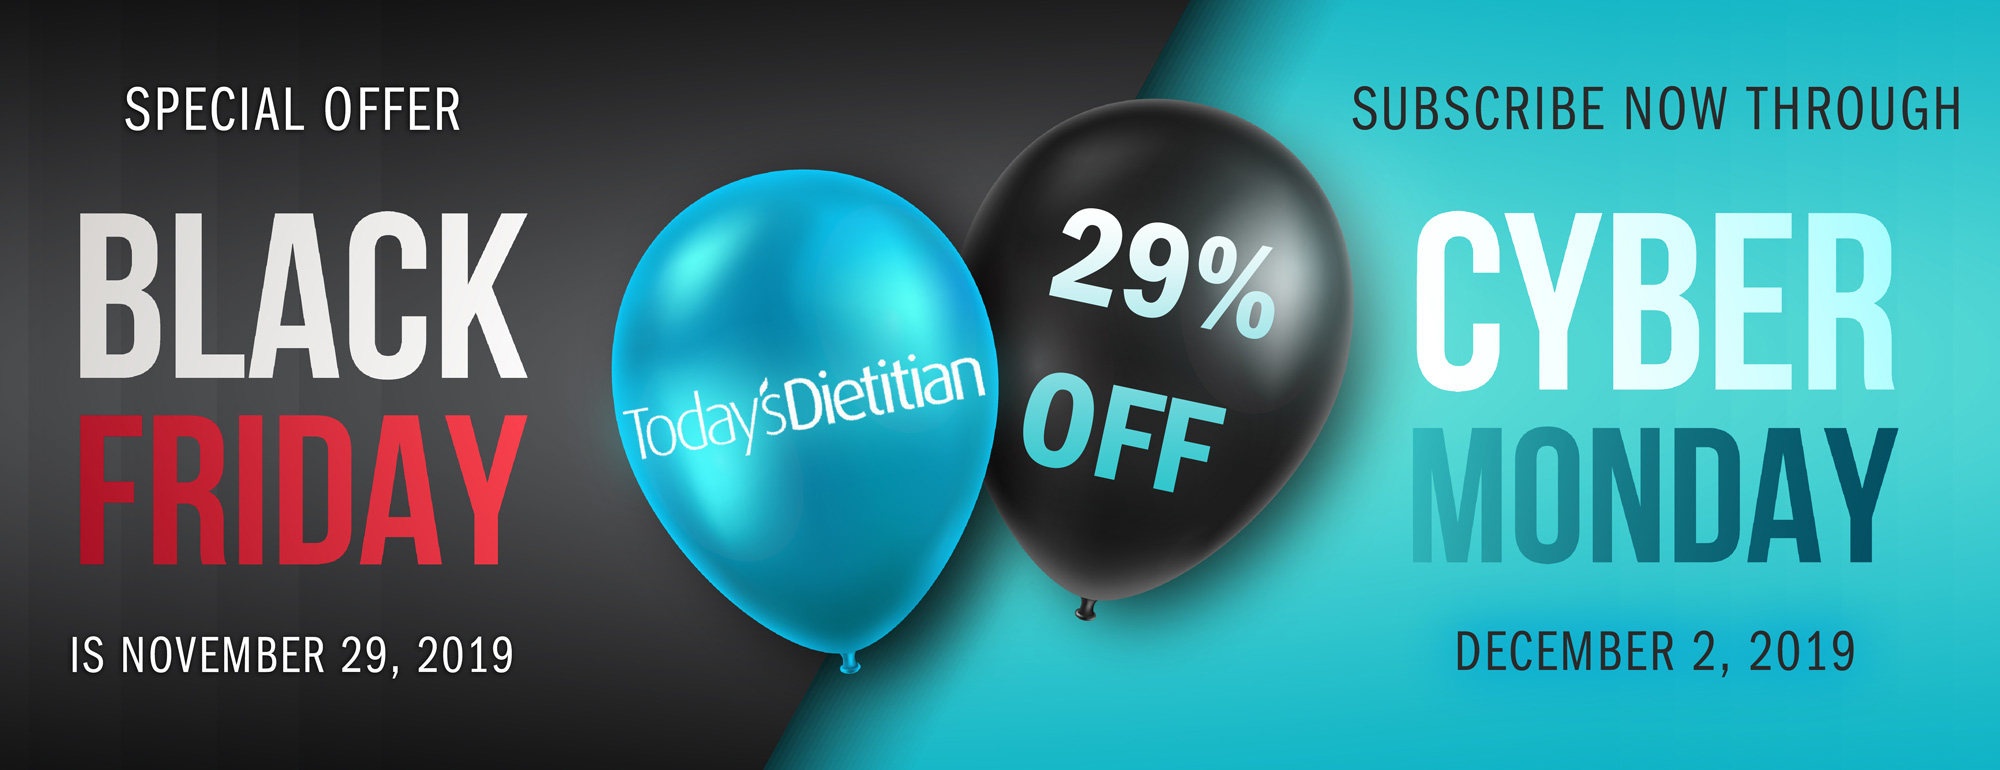 Special Offer: Black Friday is November 29, 2019. Subscribe to Today's Dietitian Now Through Cyber Monday, December 2, 2019 to receive 29% off!